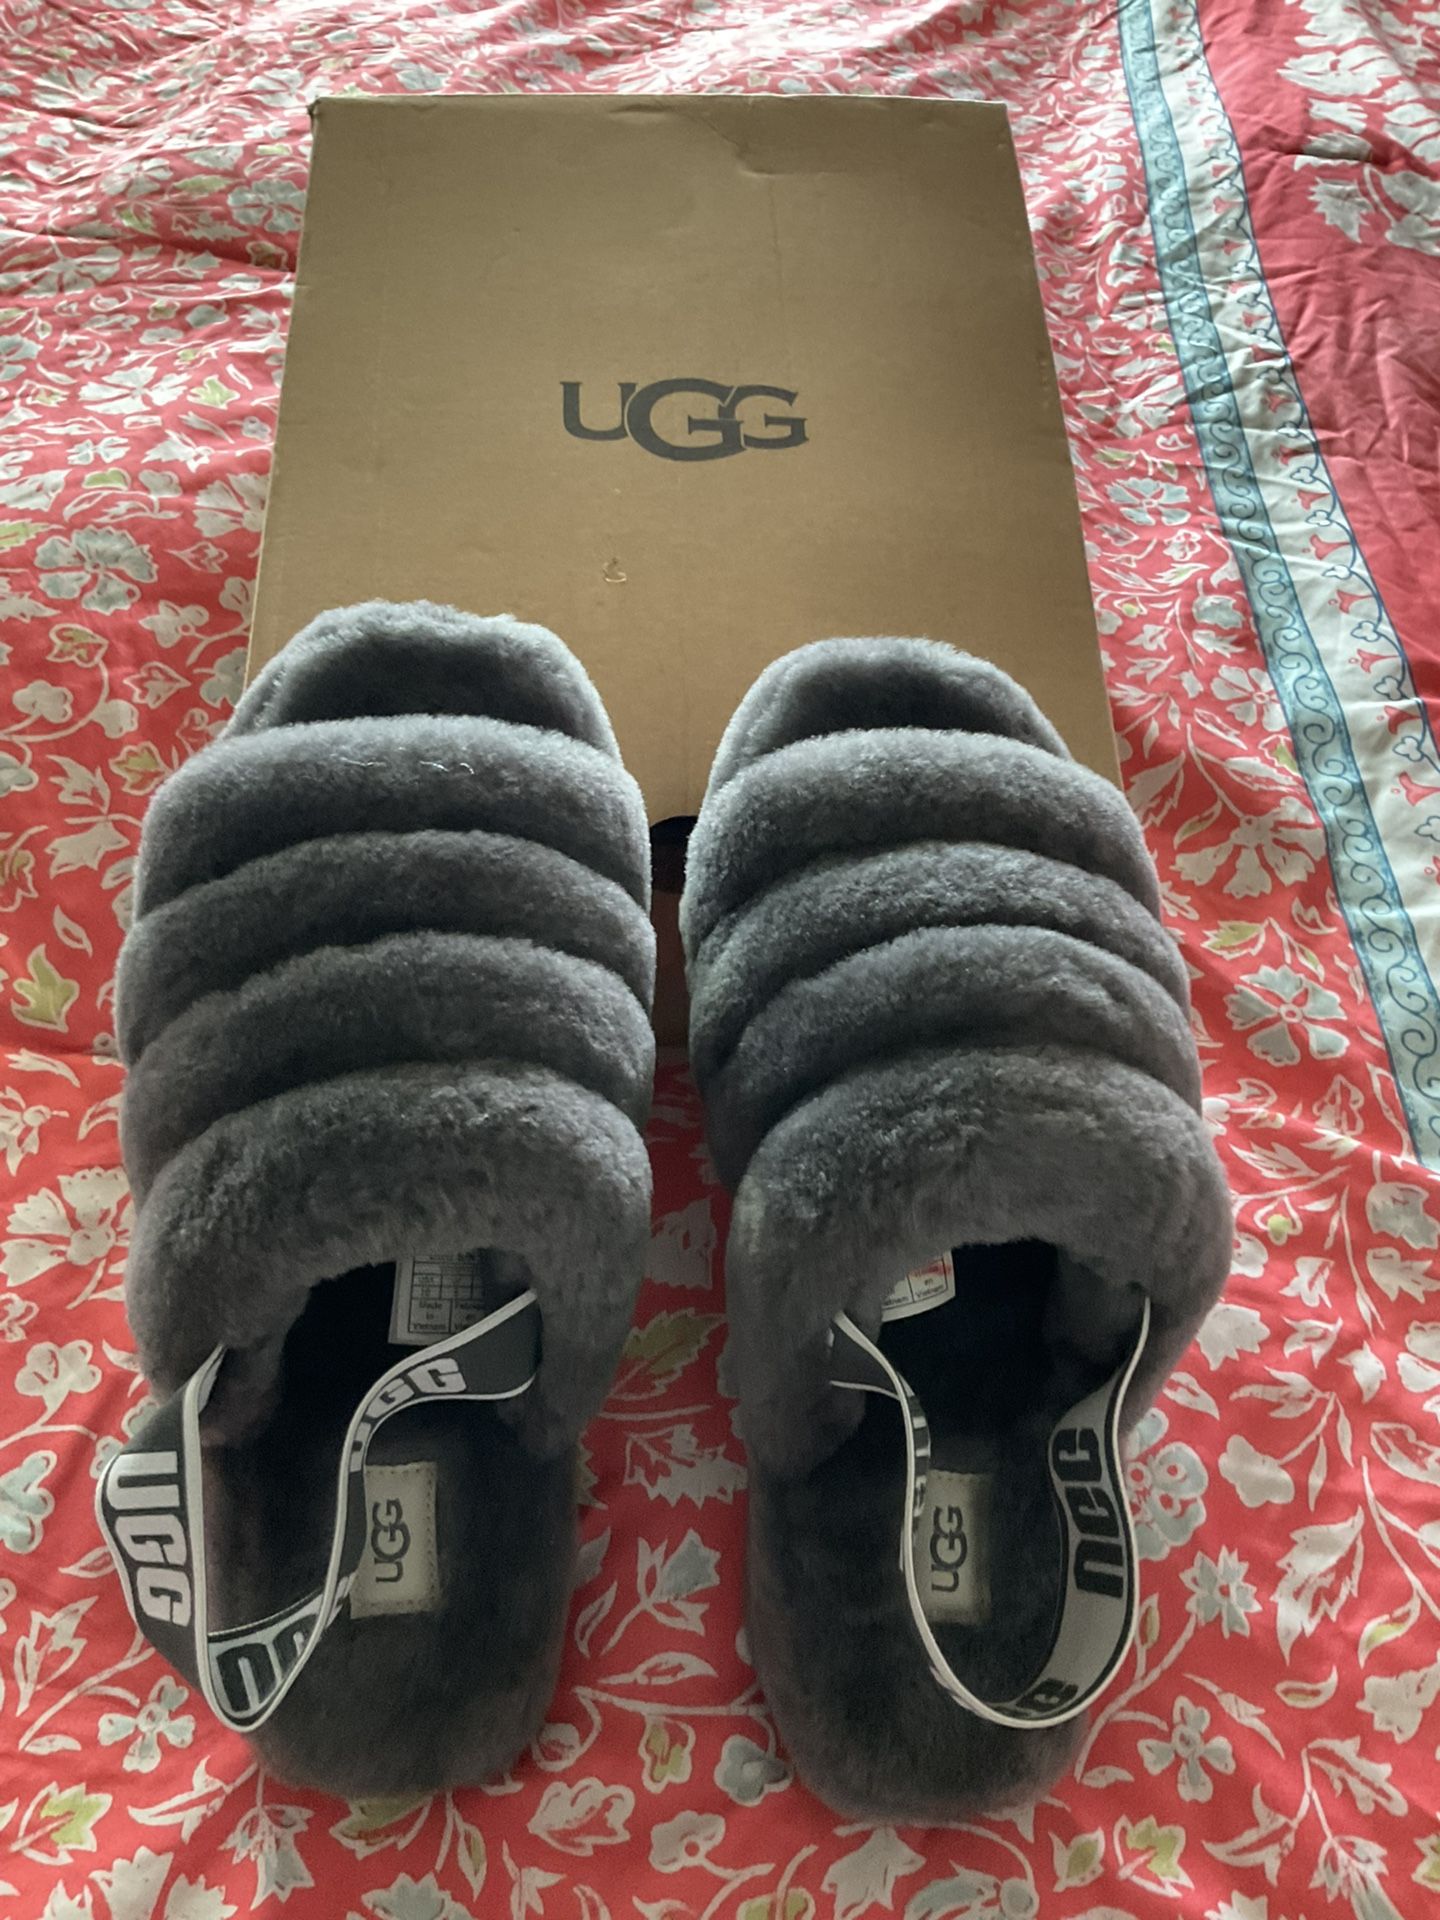 Brand New Uggs Shoes Size 10 